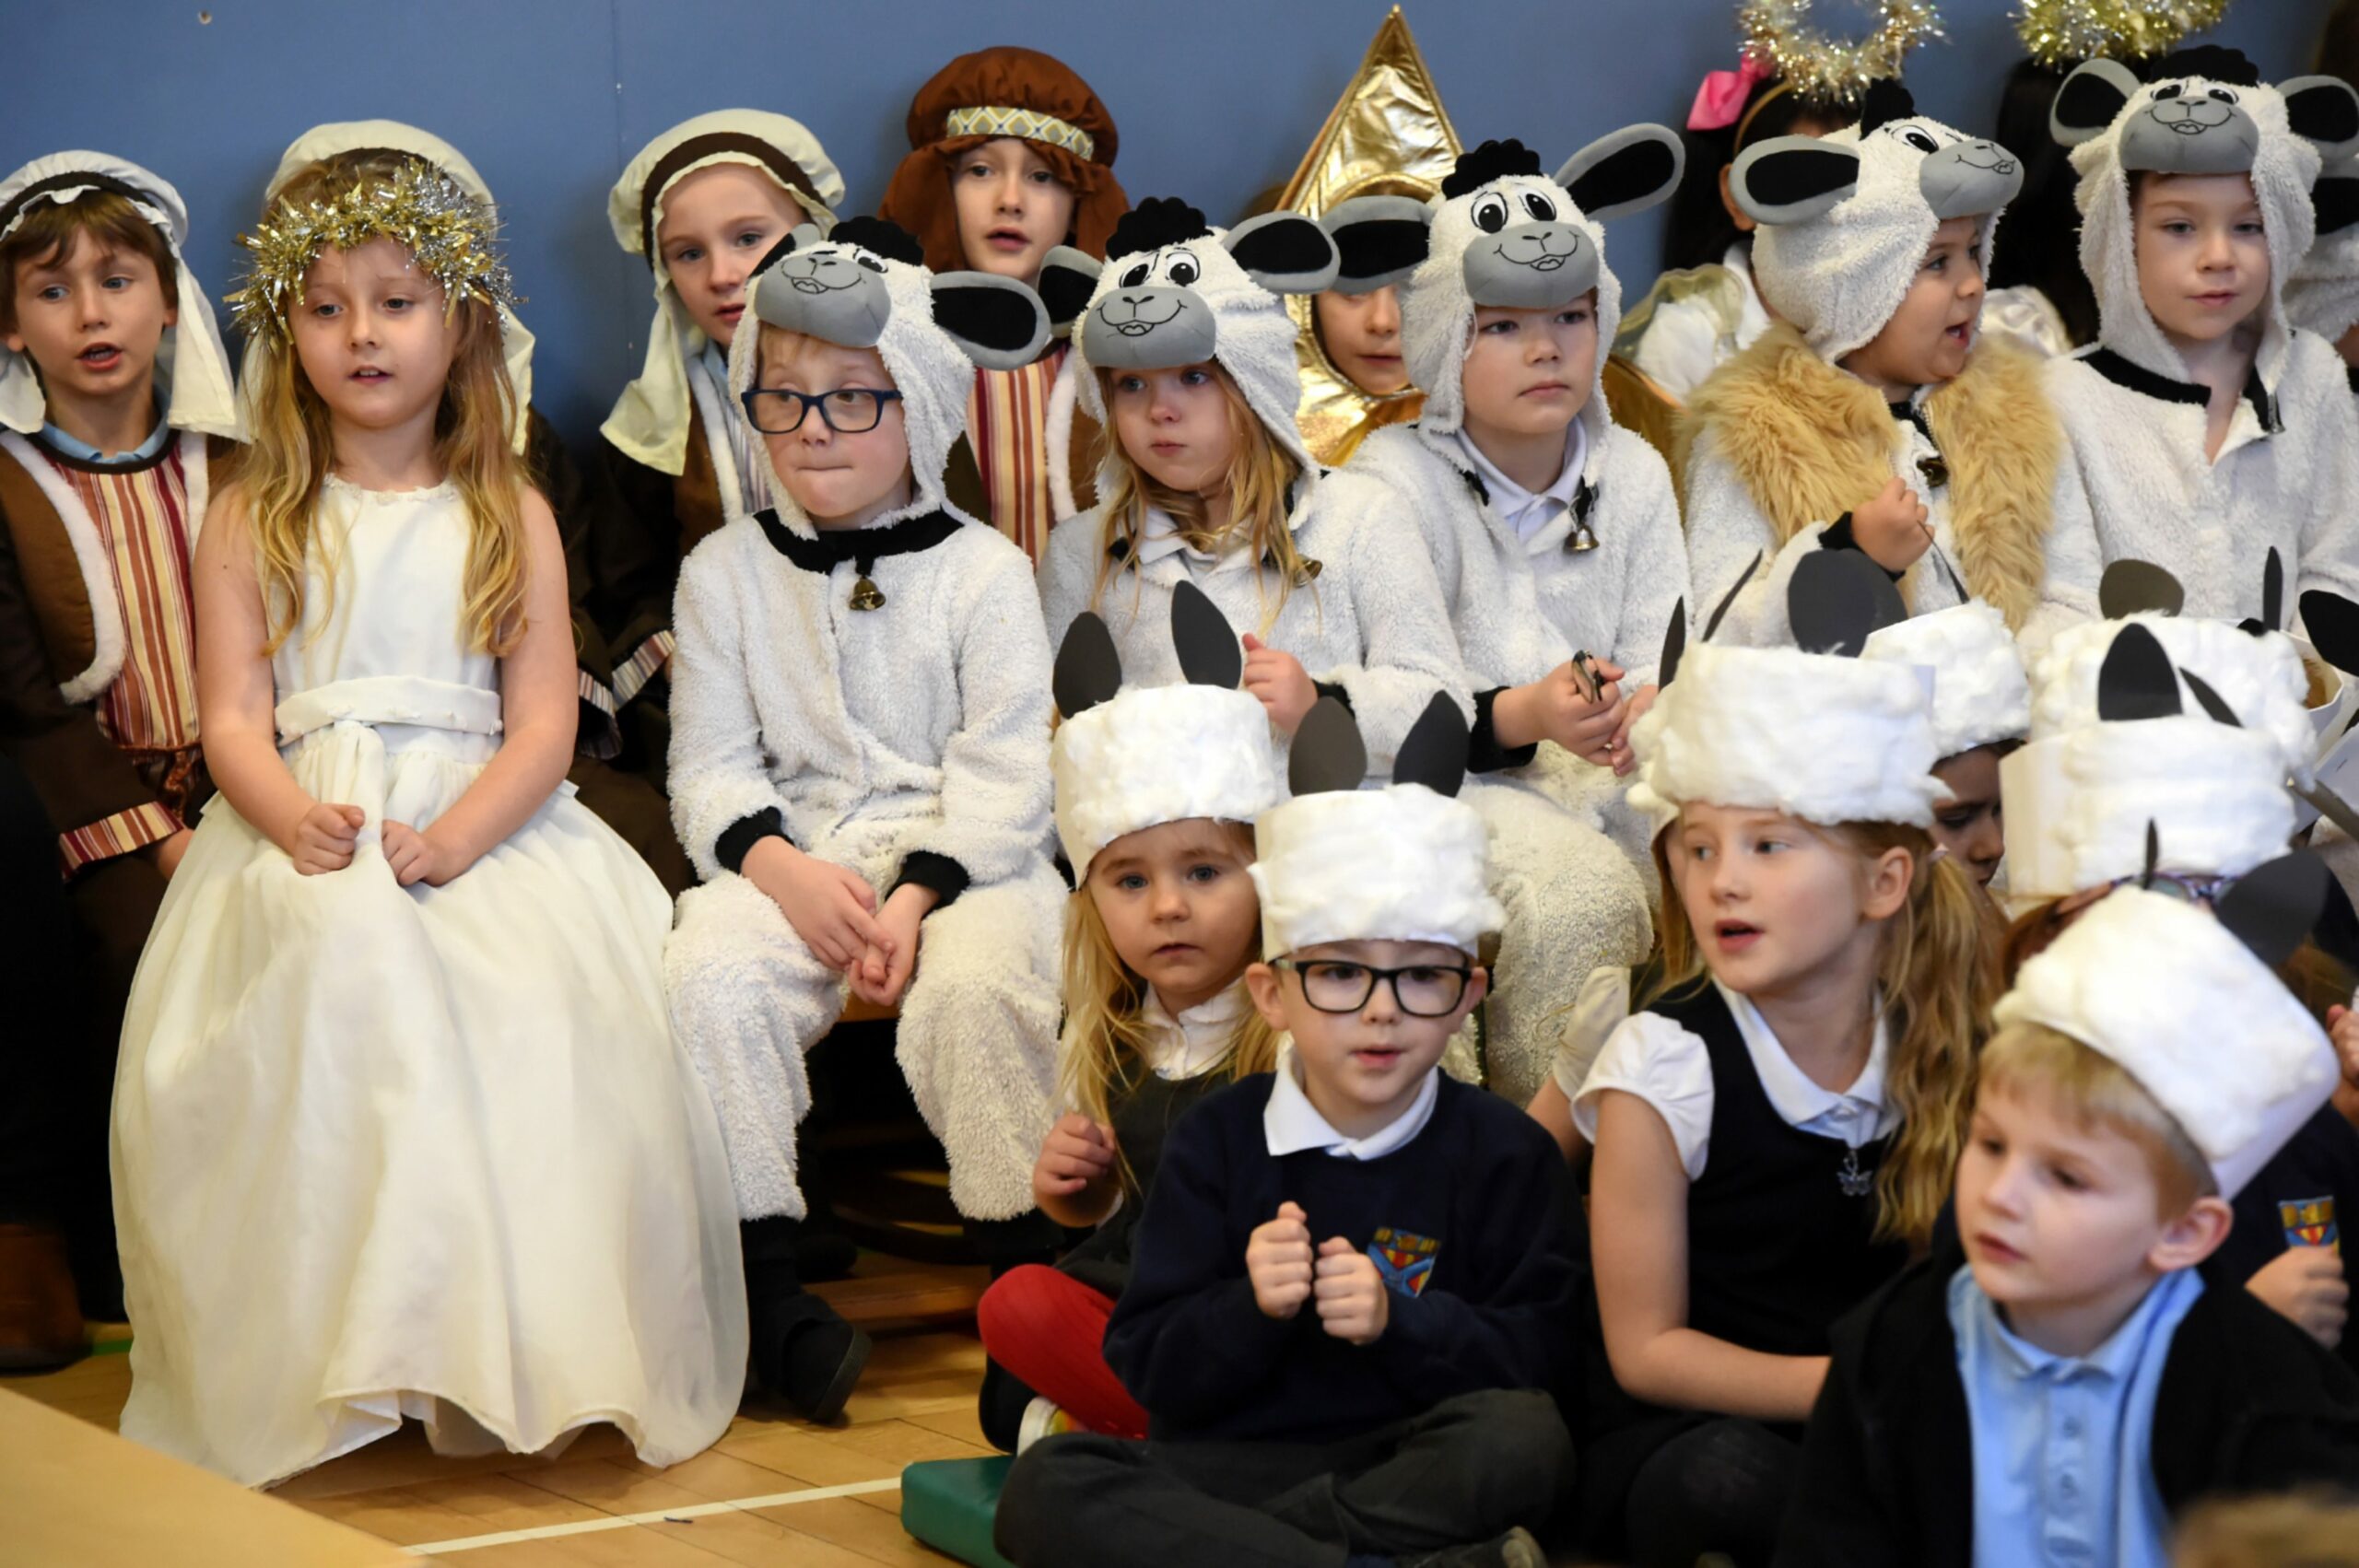 Another scene from the school's nativity in 2018.